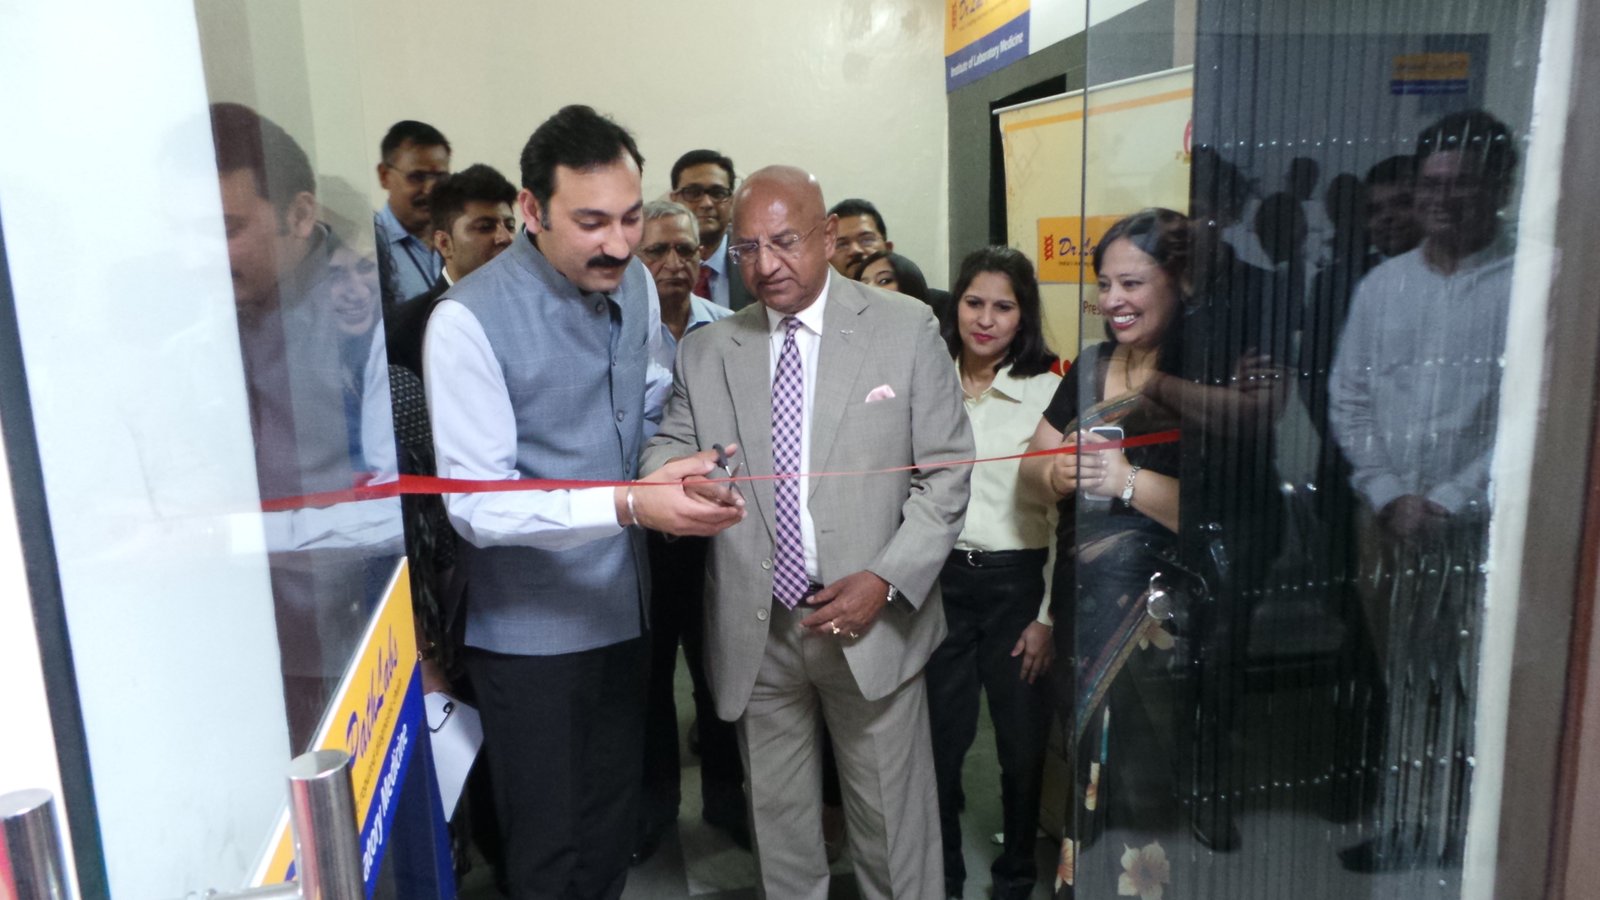 Mr Varun Khanna, managing director, BD - India (L) and Dr Arvind Lal, CMD, Dr LalPath Labs (R) inaugurating the Centre of Excellence for best lab practices at New Delhi on June 19, 2015.